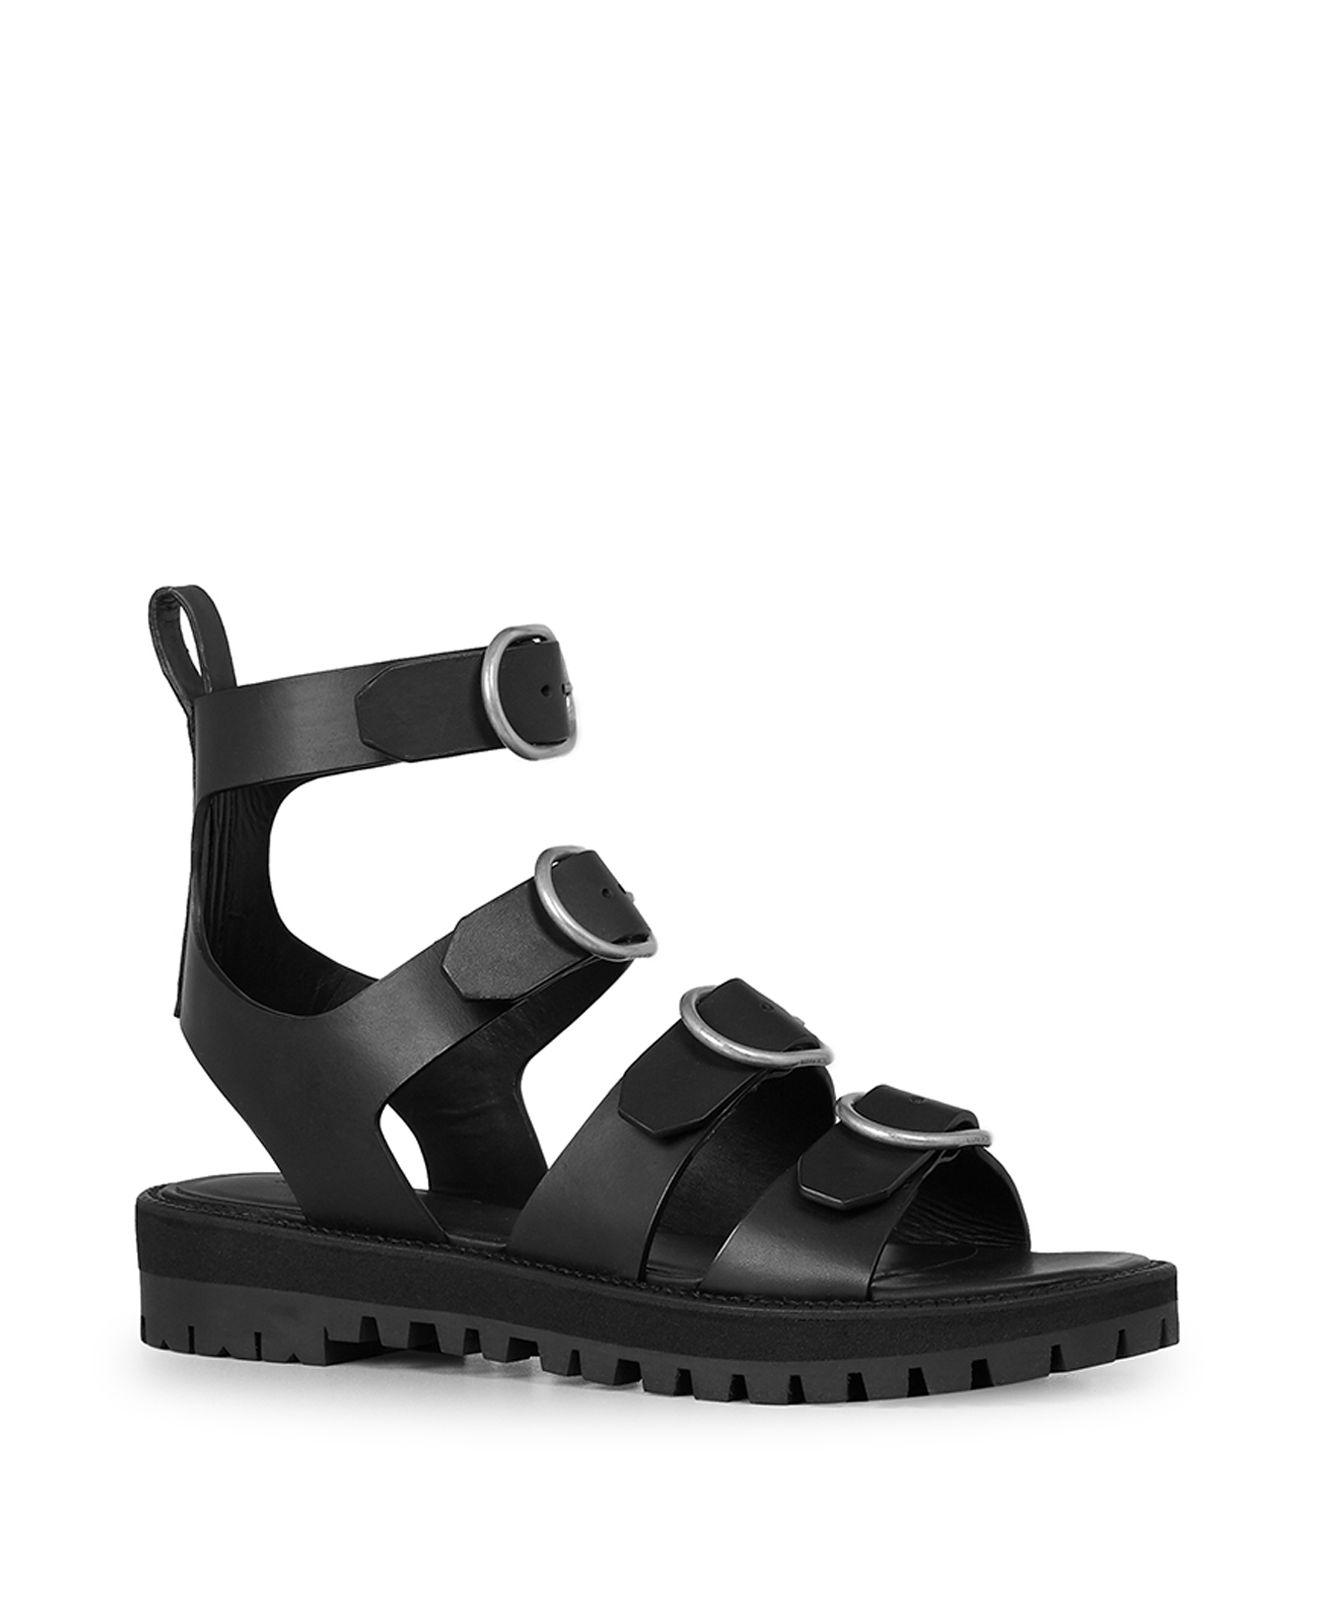 AllSaints Raquel Leather Buckled Sandals in Black/Silver (Black) - Lyst